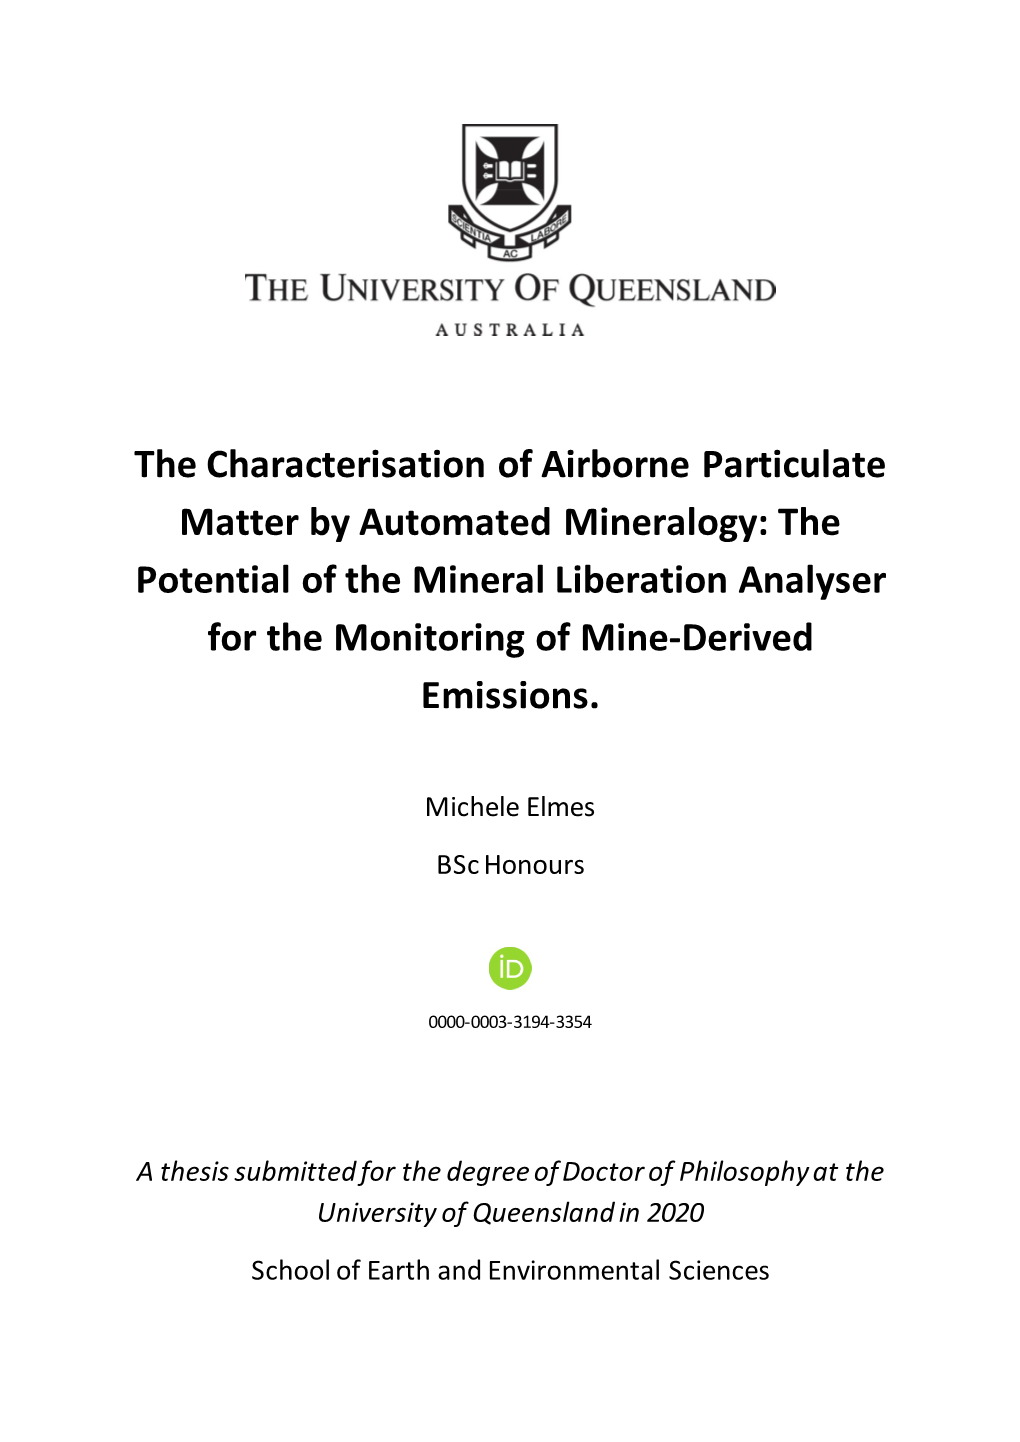 The Characterisation of Airborne Particulate Matter By